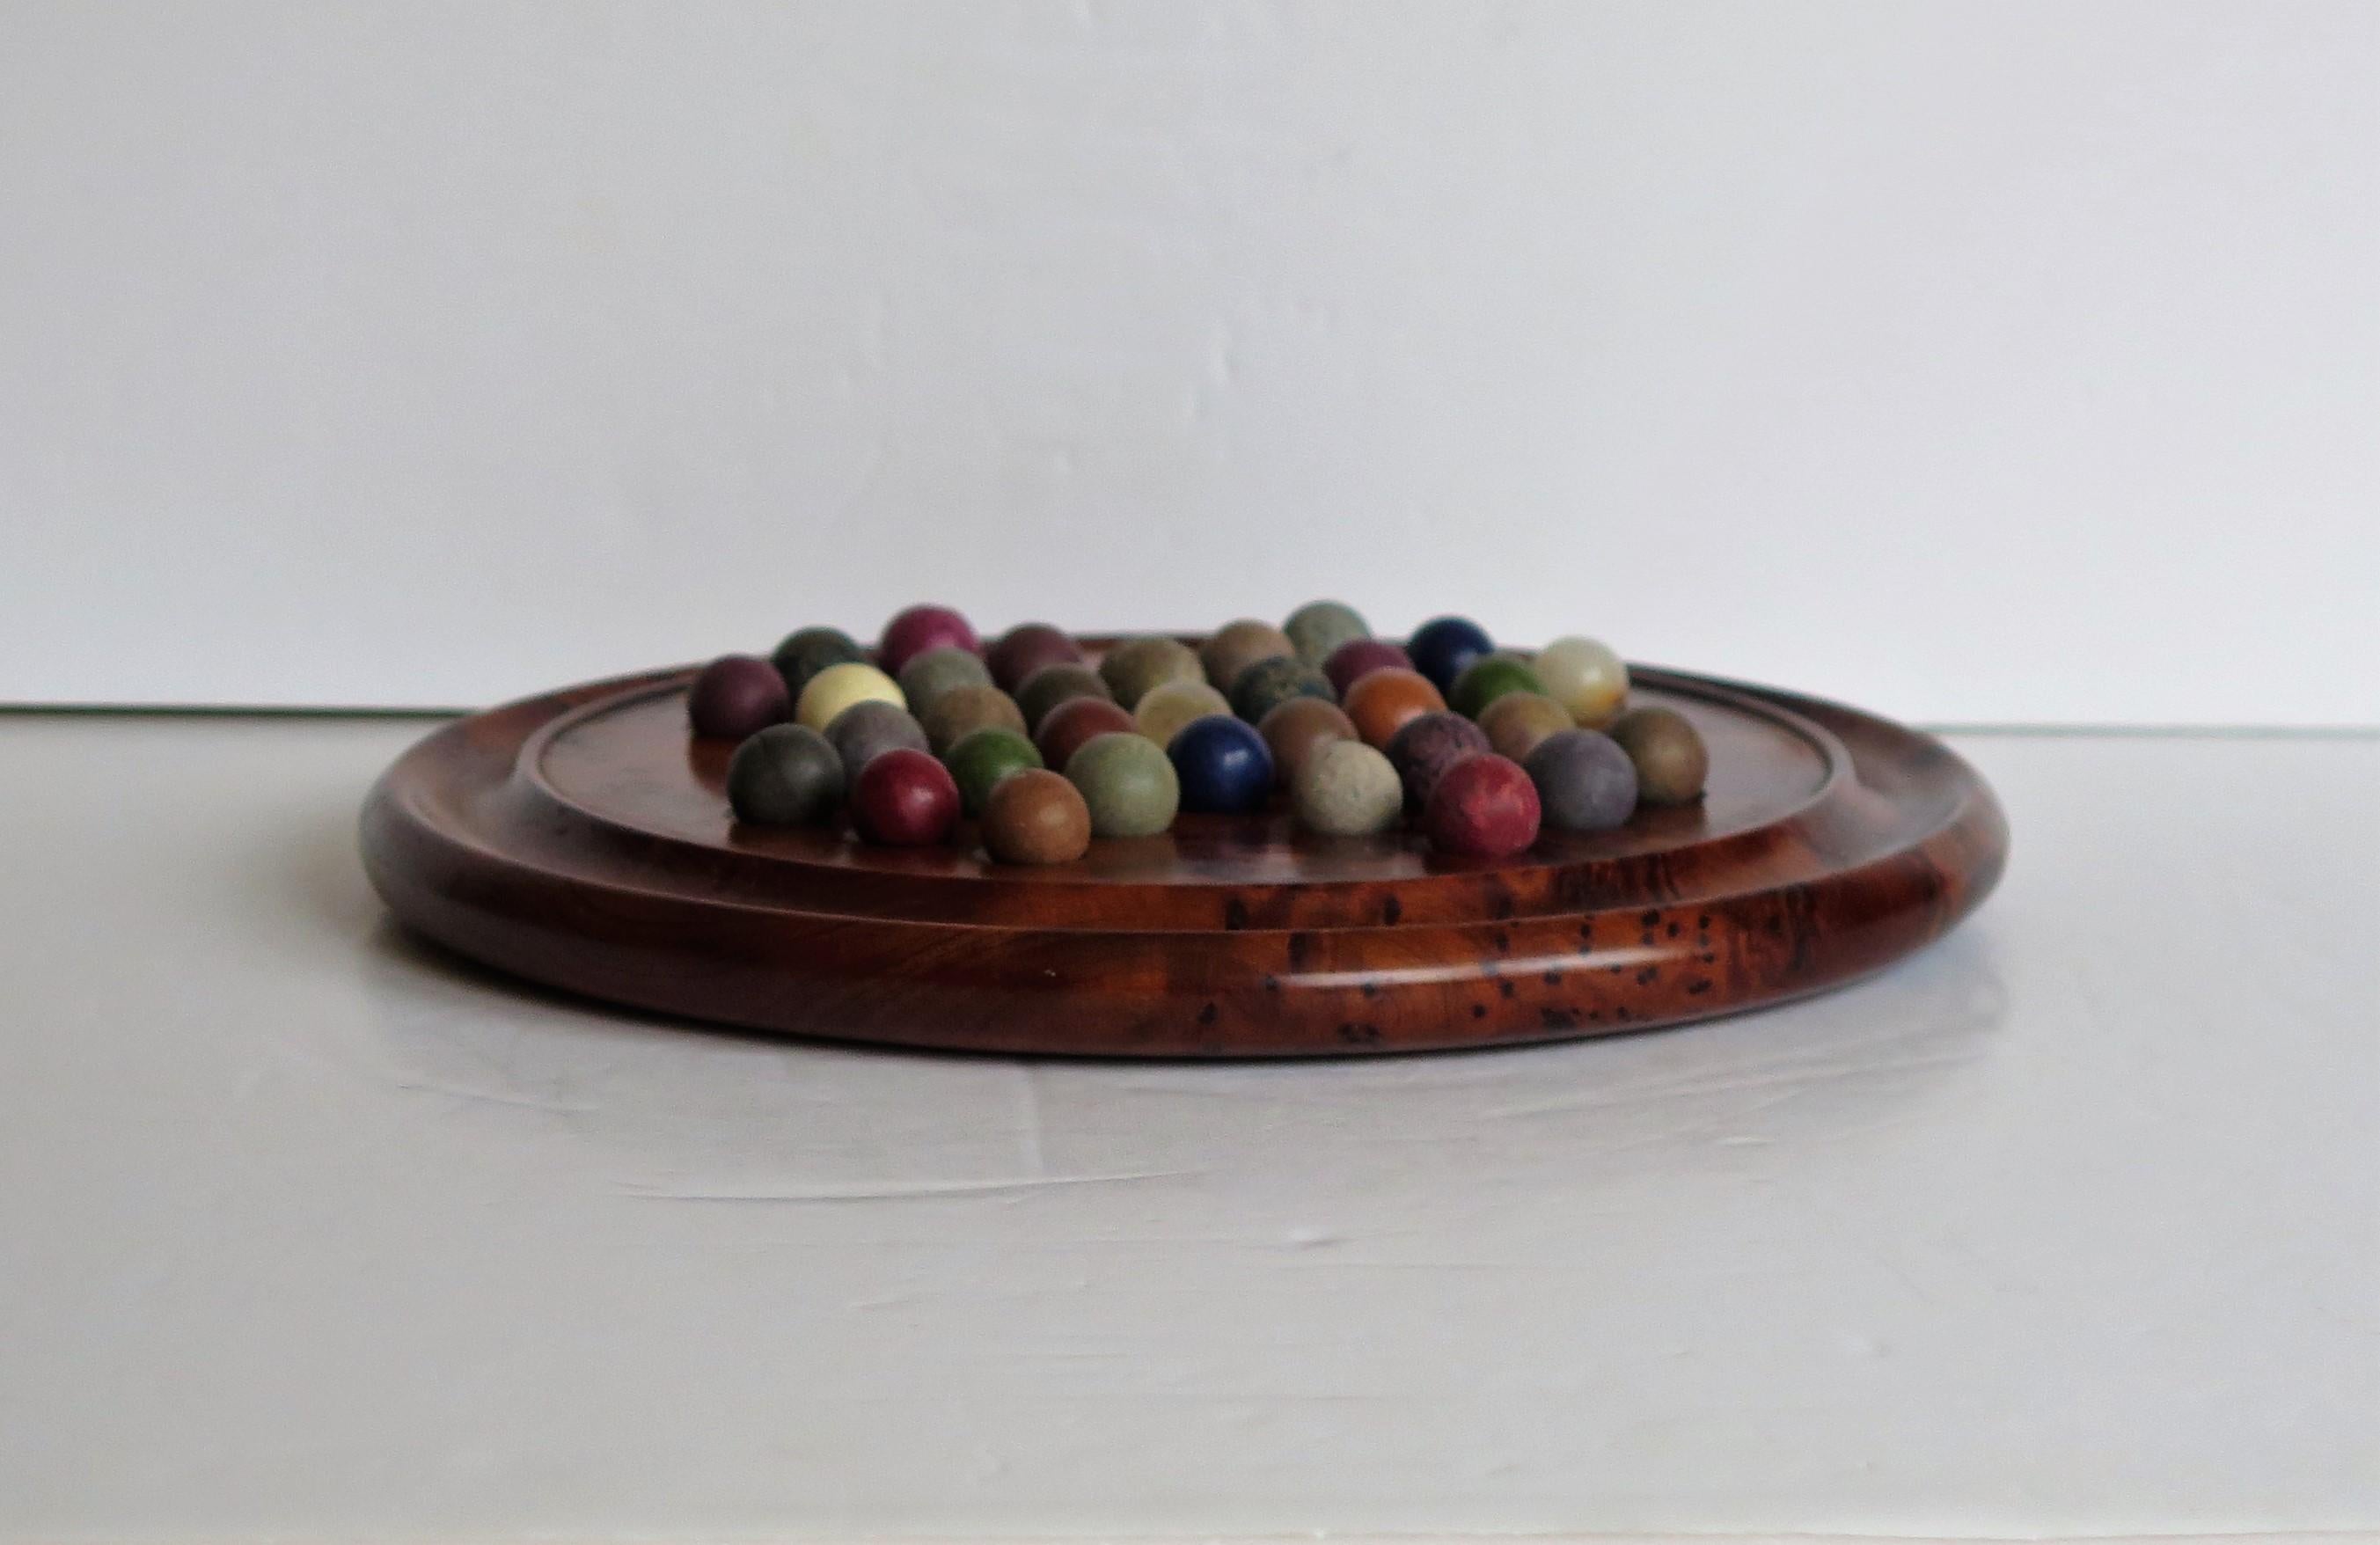 Hand-Crafted Marble Solitaire Board Game with 33 Early Handmade Stone Marbles, circa 1900